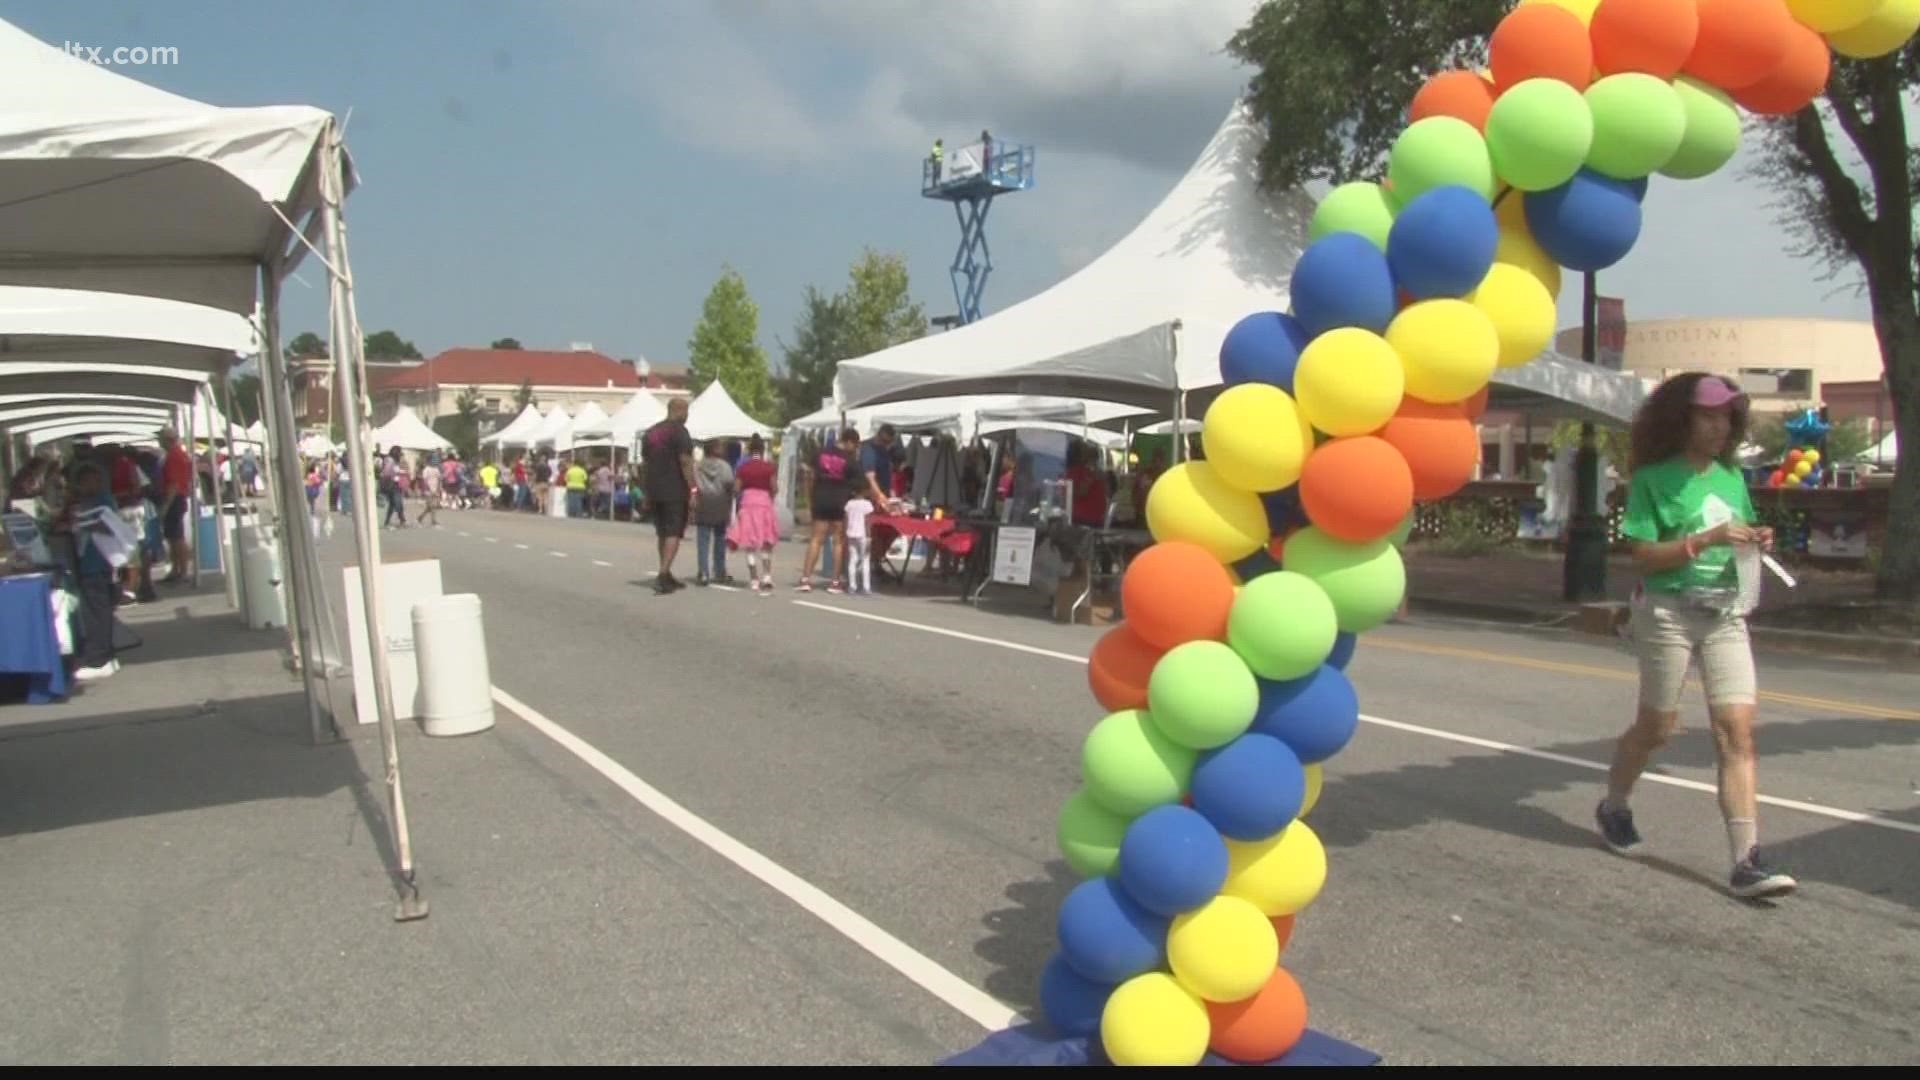 The festival is scheduled for Saturday in downtown Sumter.